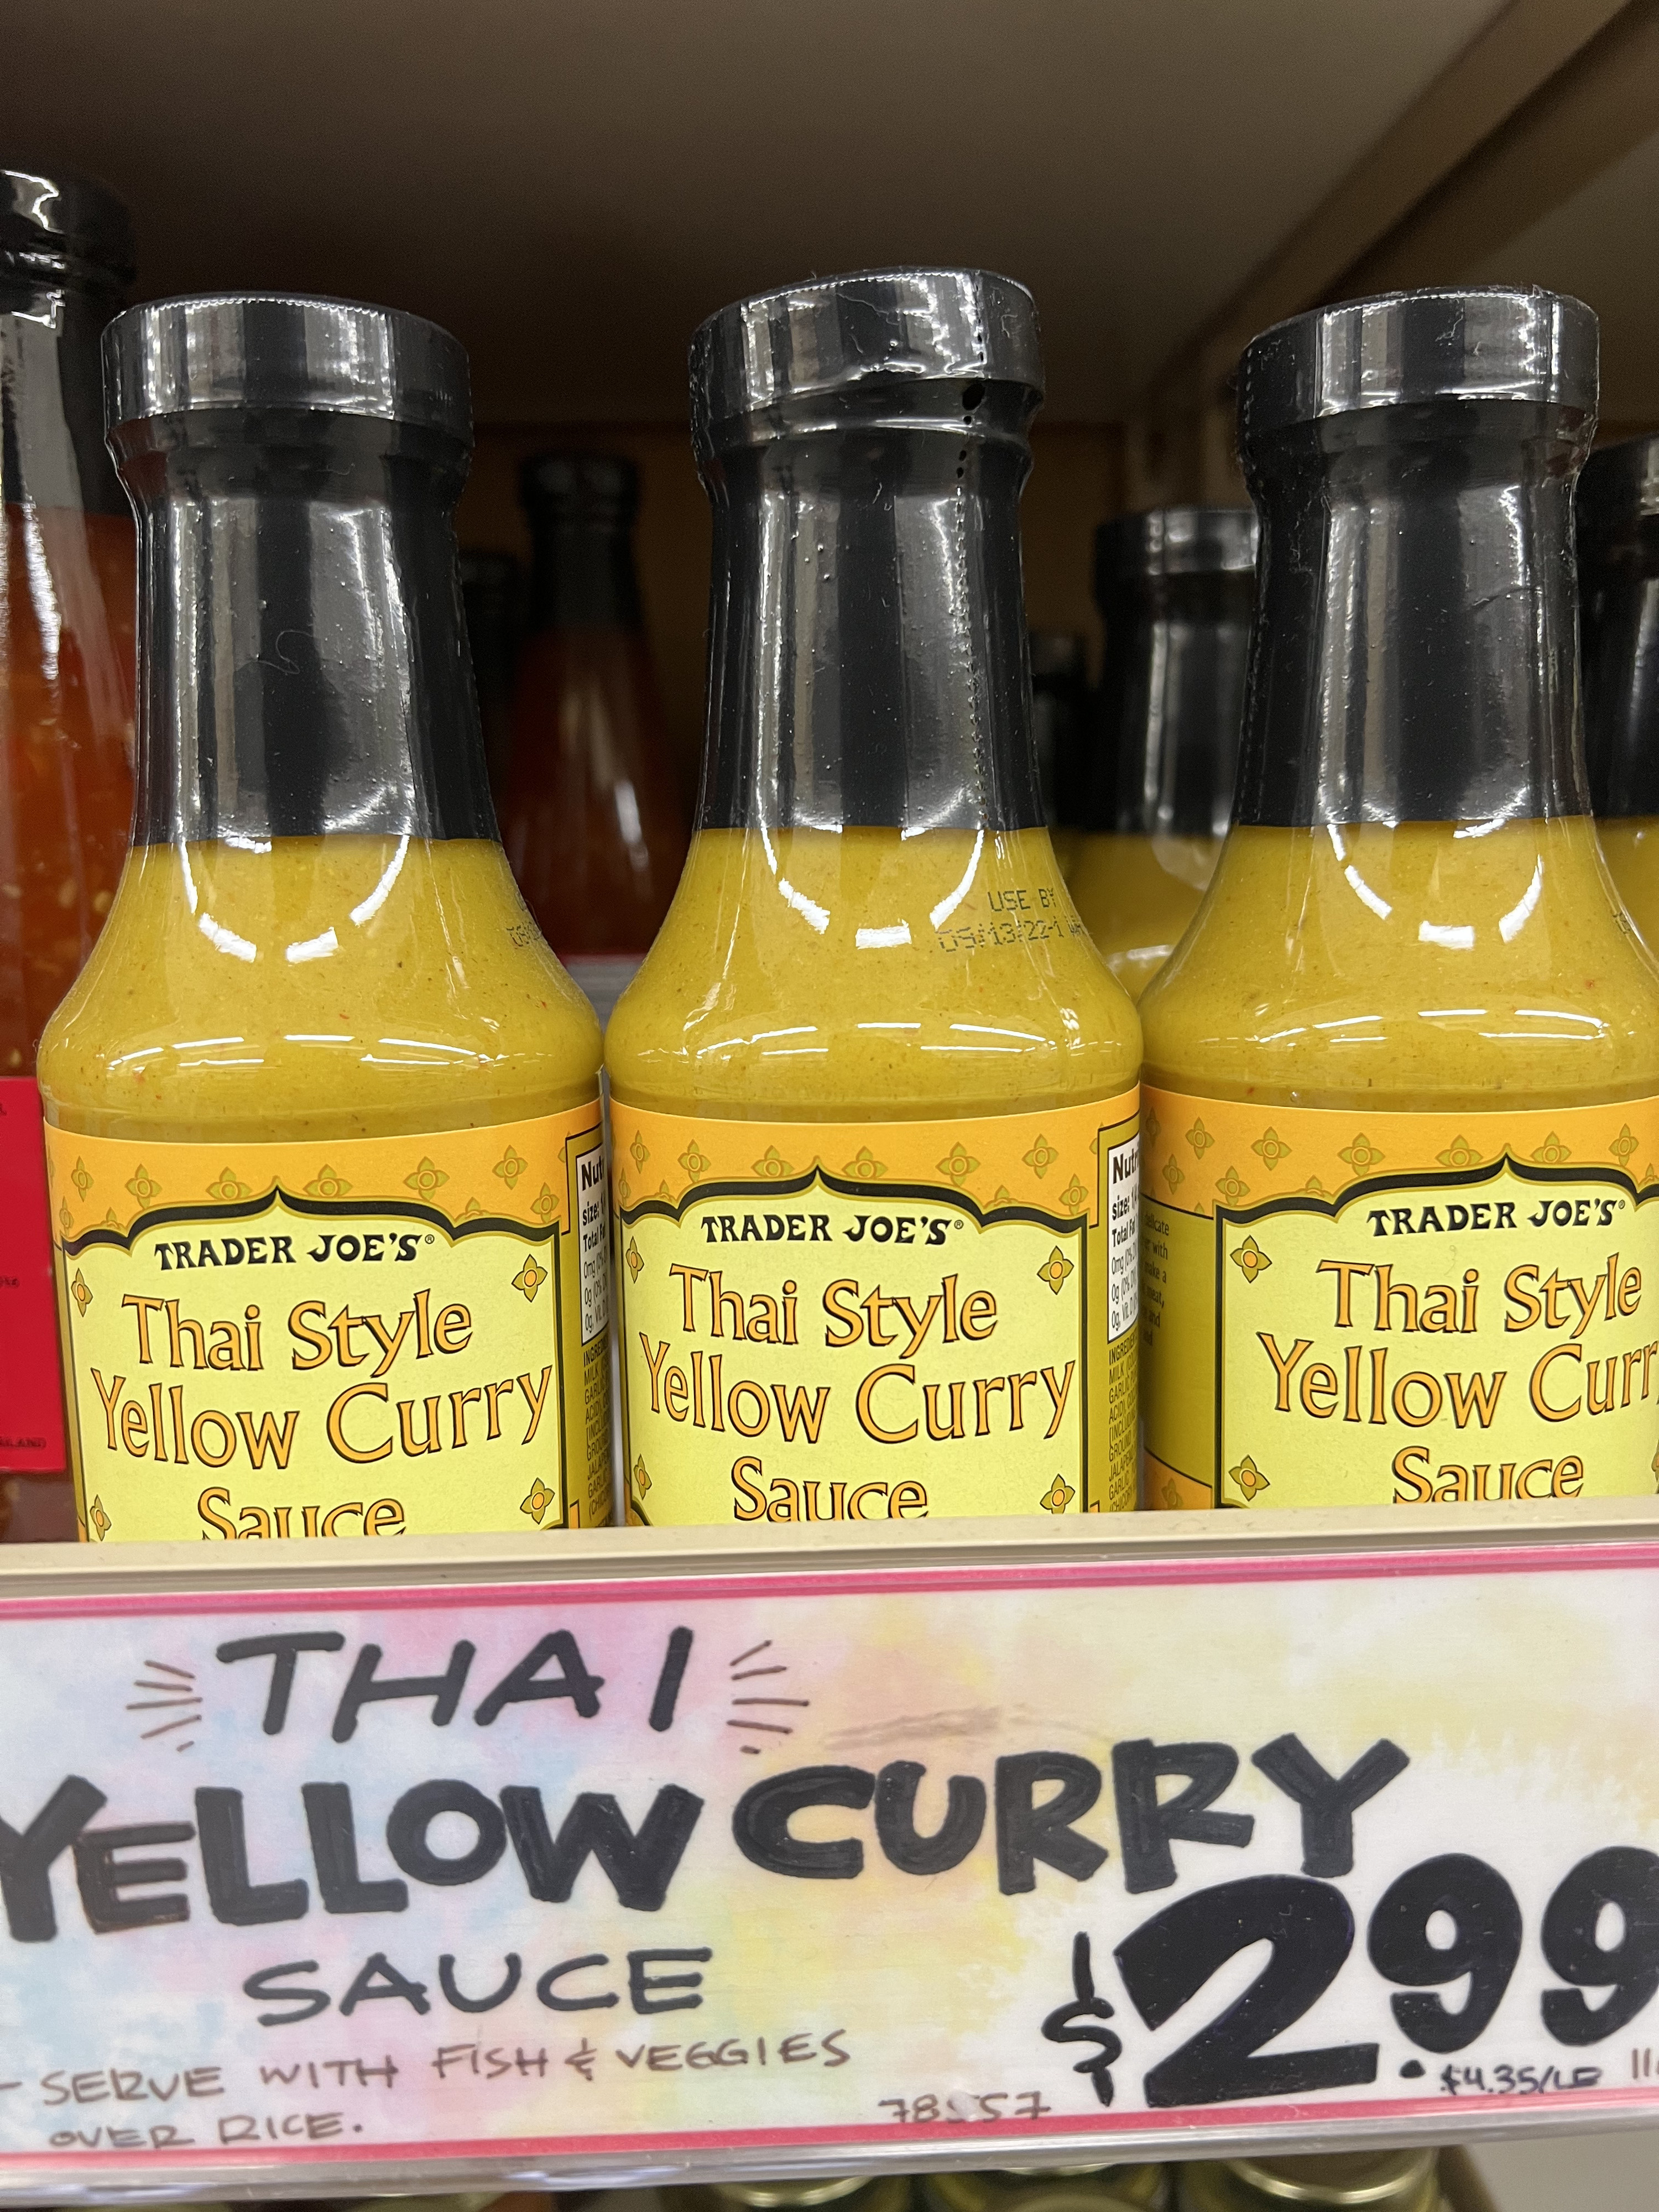 Thai-Style Yellow Curry Sauce